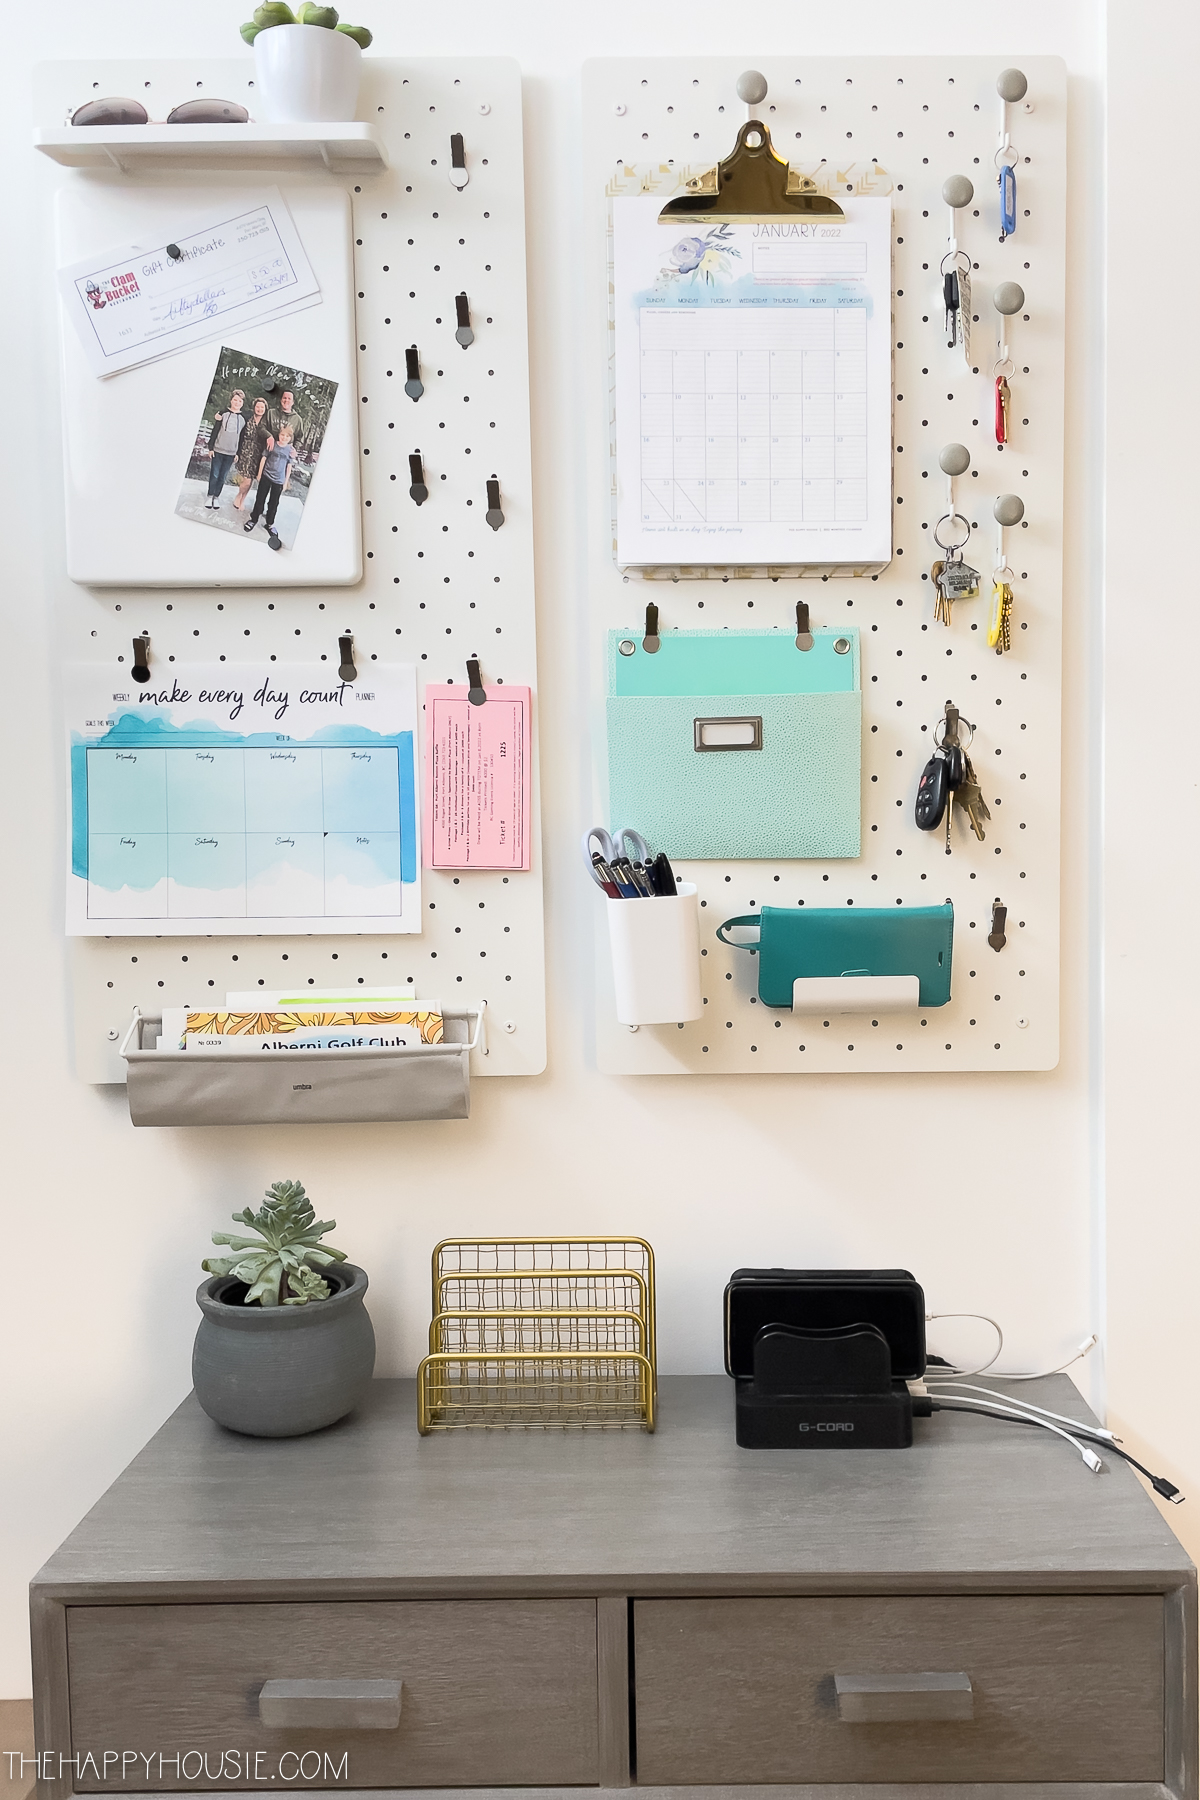 pegboard organizer on the wall turned into a family command center